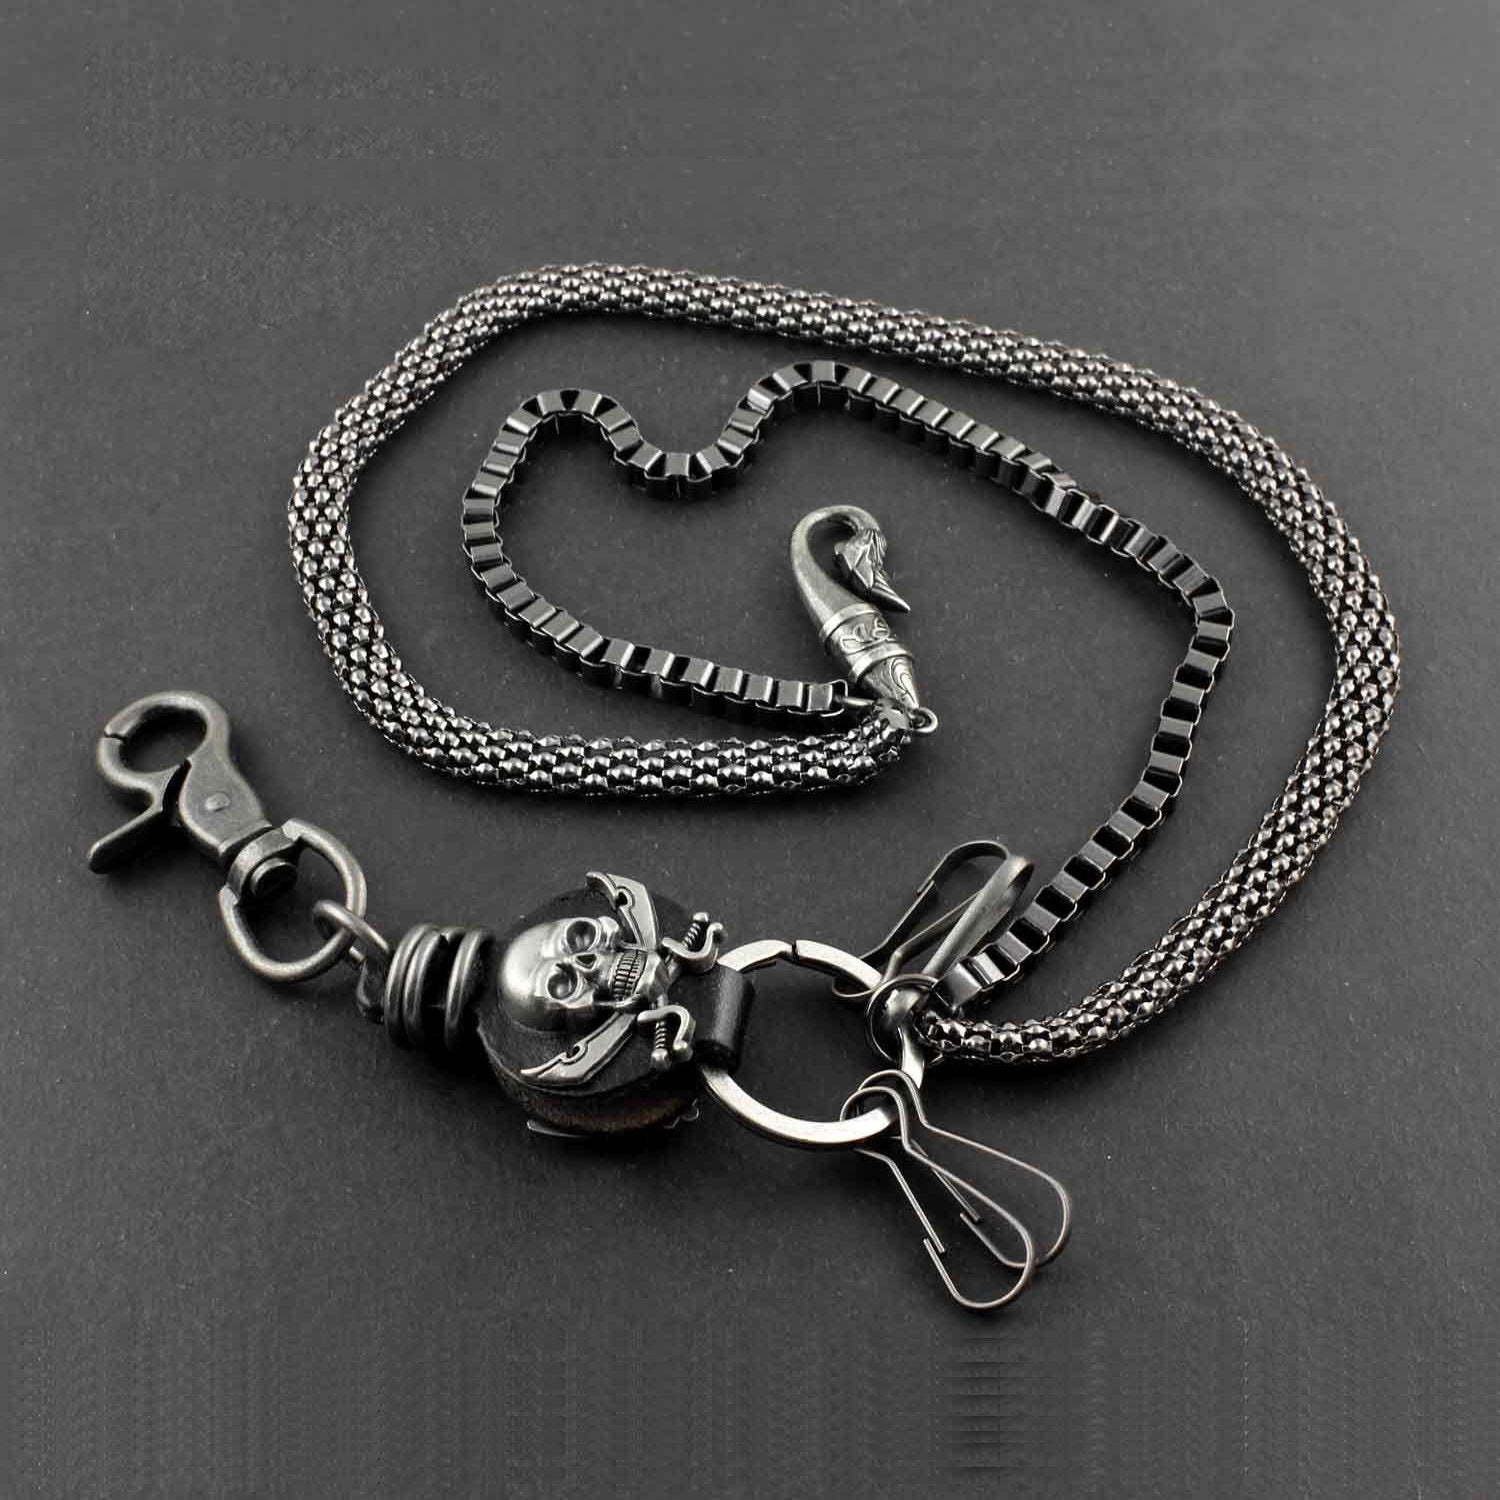 Solid Metal Leather Skull Wallet Chain Cool Punk Rock Biker Trucker Wallet Chain Trucker Wallet Chain for Men